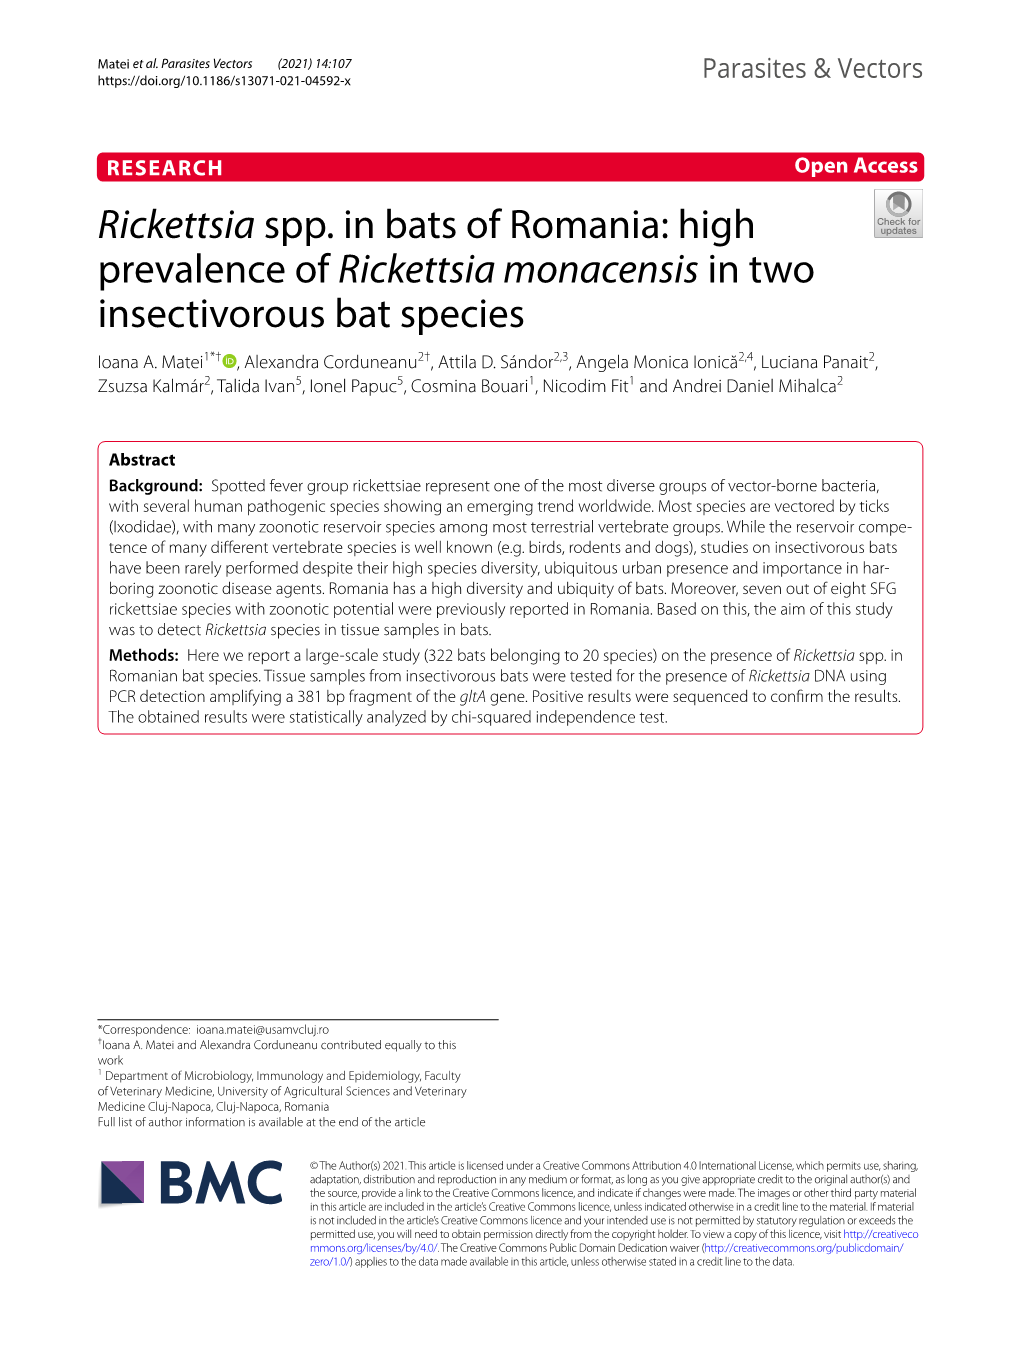 Rickettsia Spp. in Bats of Romania: High Prevalence of Rickettsia Monacensis in Two Insectivorous Bat Species Ioana A